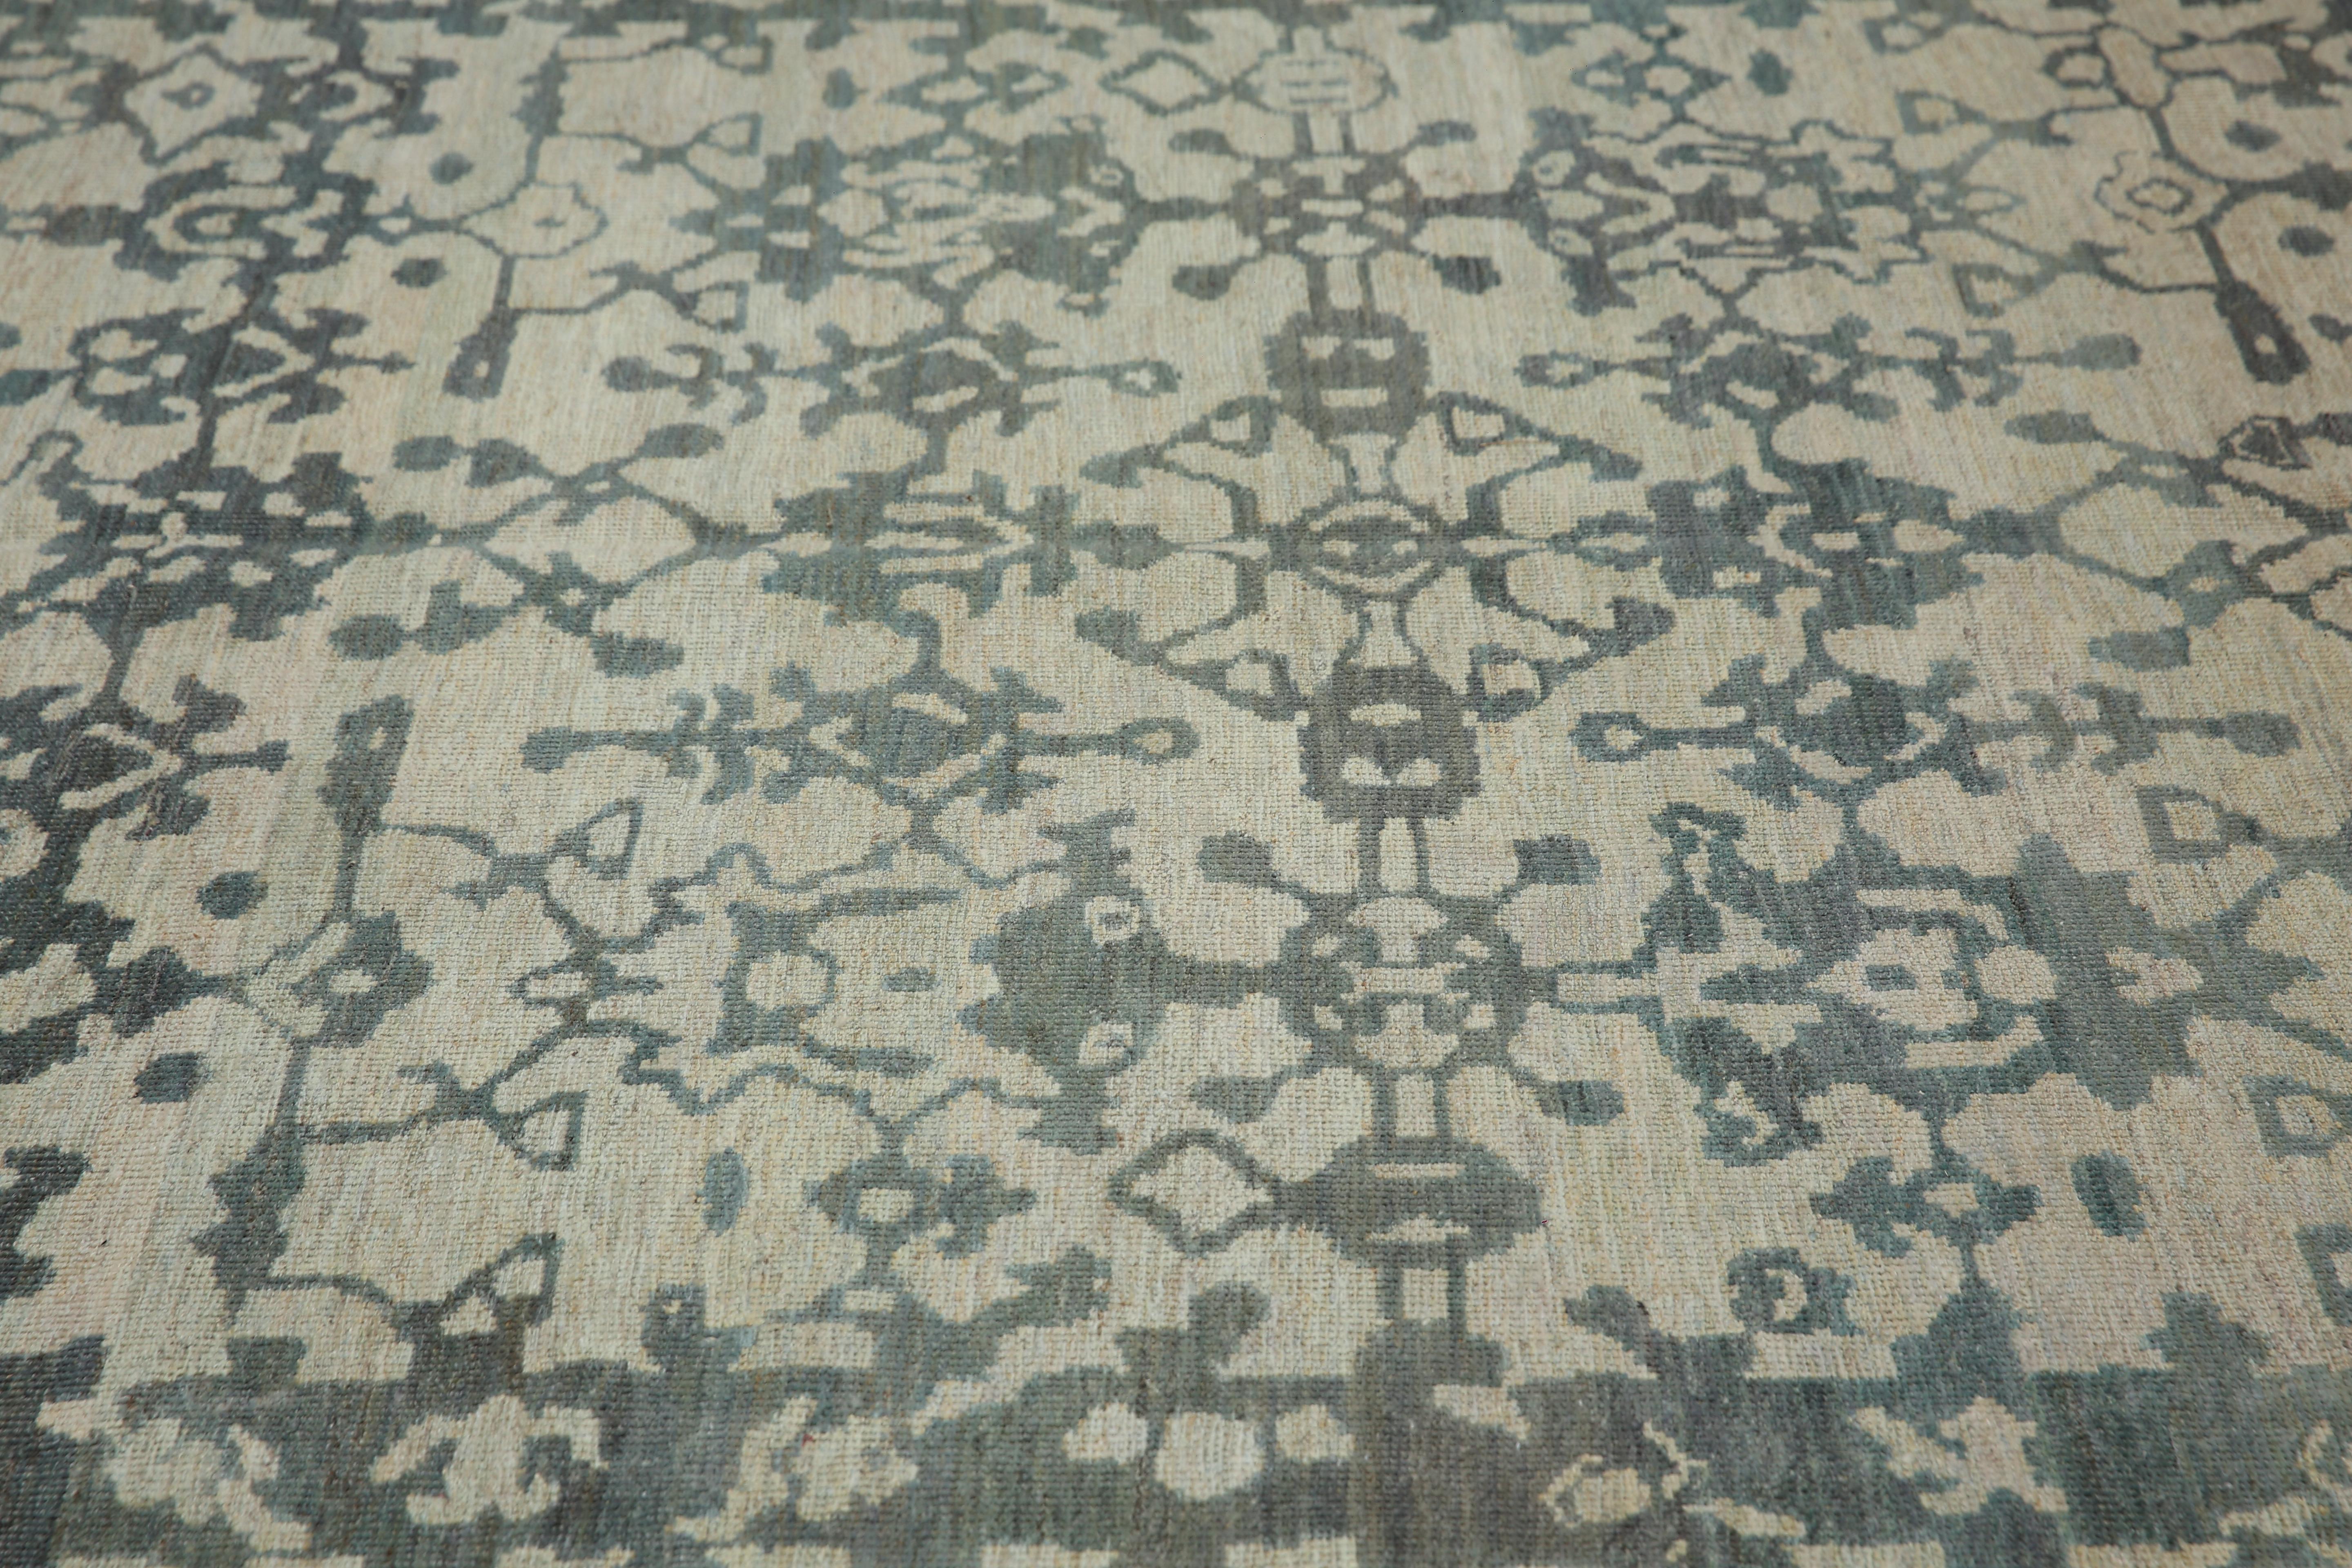 Contemporary Luxurious Handmade Sultanabad Rug - Transitional Design, Blue Tones - 5'10'' x 8 For Sale